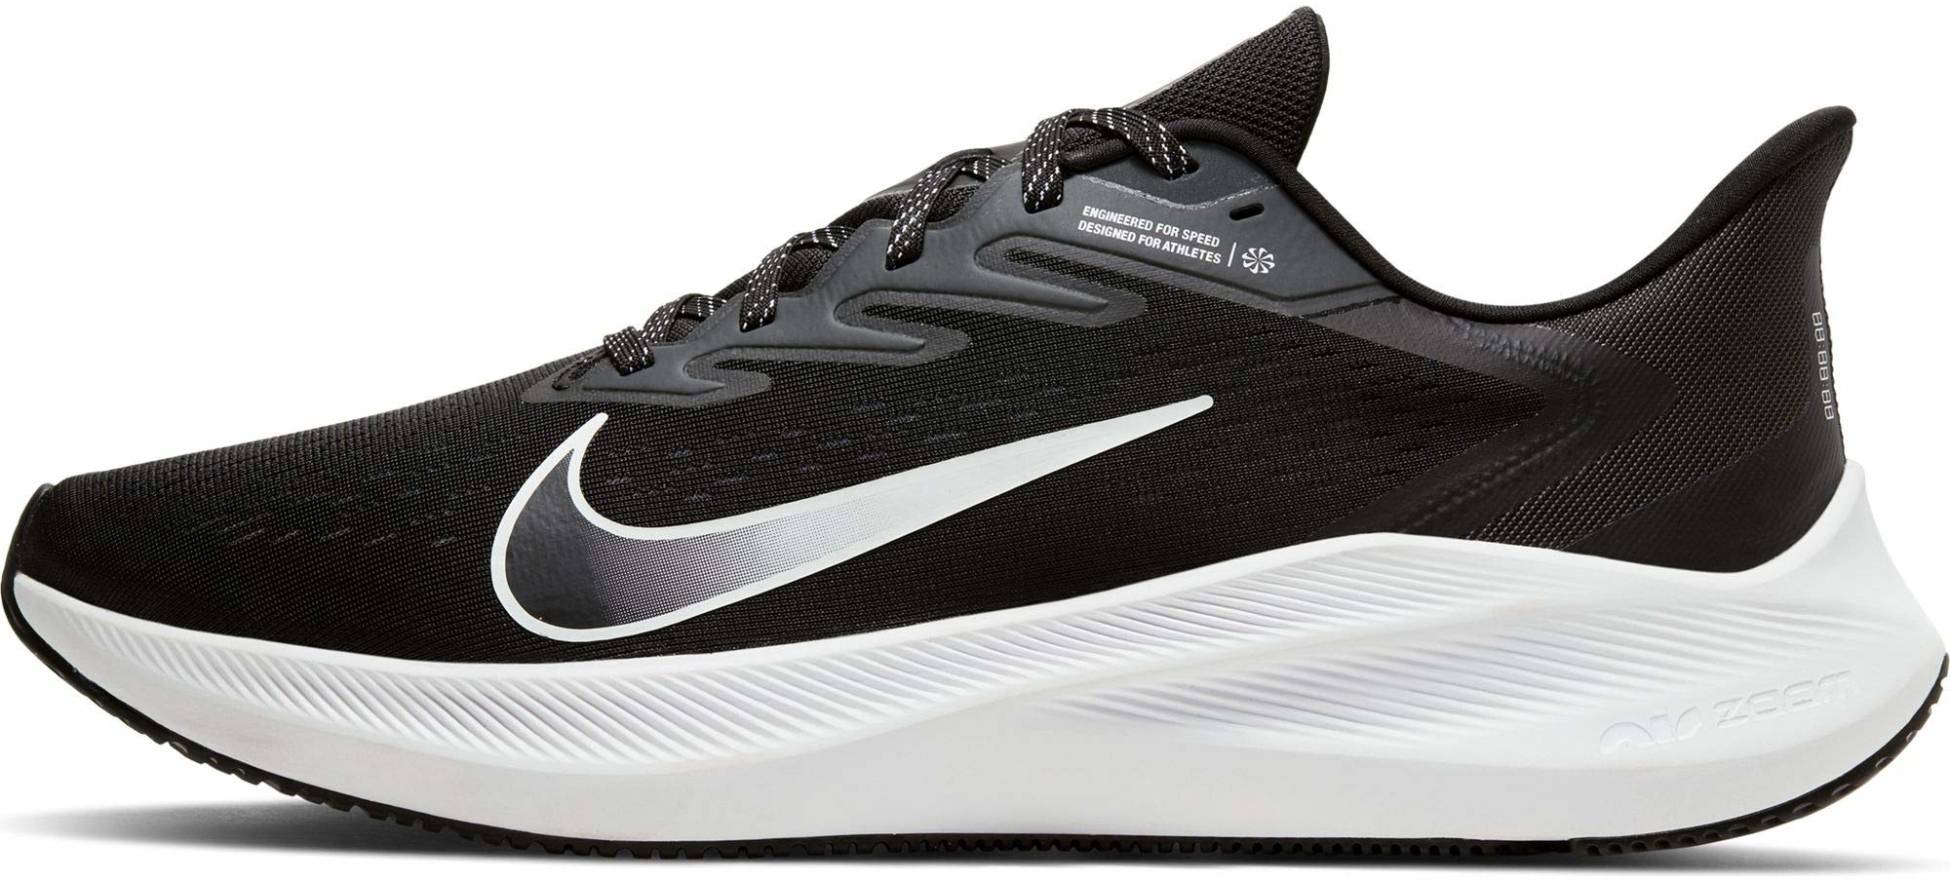 Nike Air Zoom Winflo 7 - Review 2021 - Facts, Deals ($69) | RunRepeat